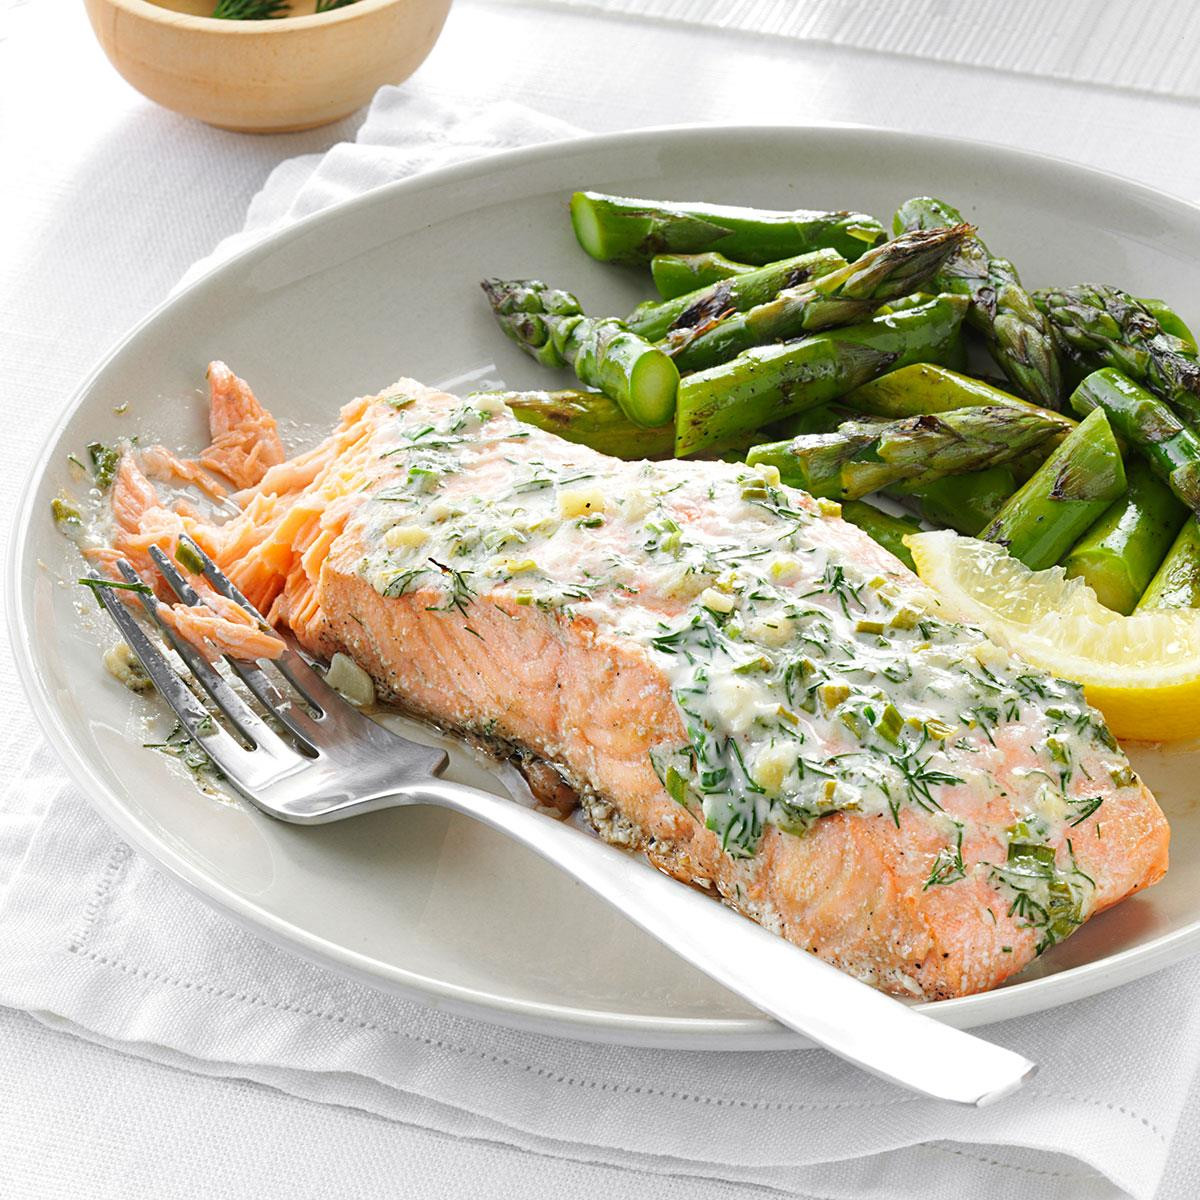 Grill Dinner Ideas
 Creamy Herb Grilled Salmon Recipe